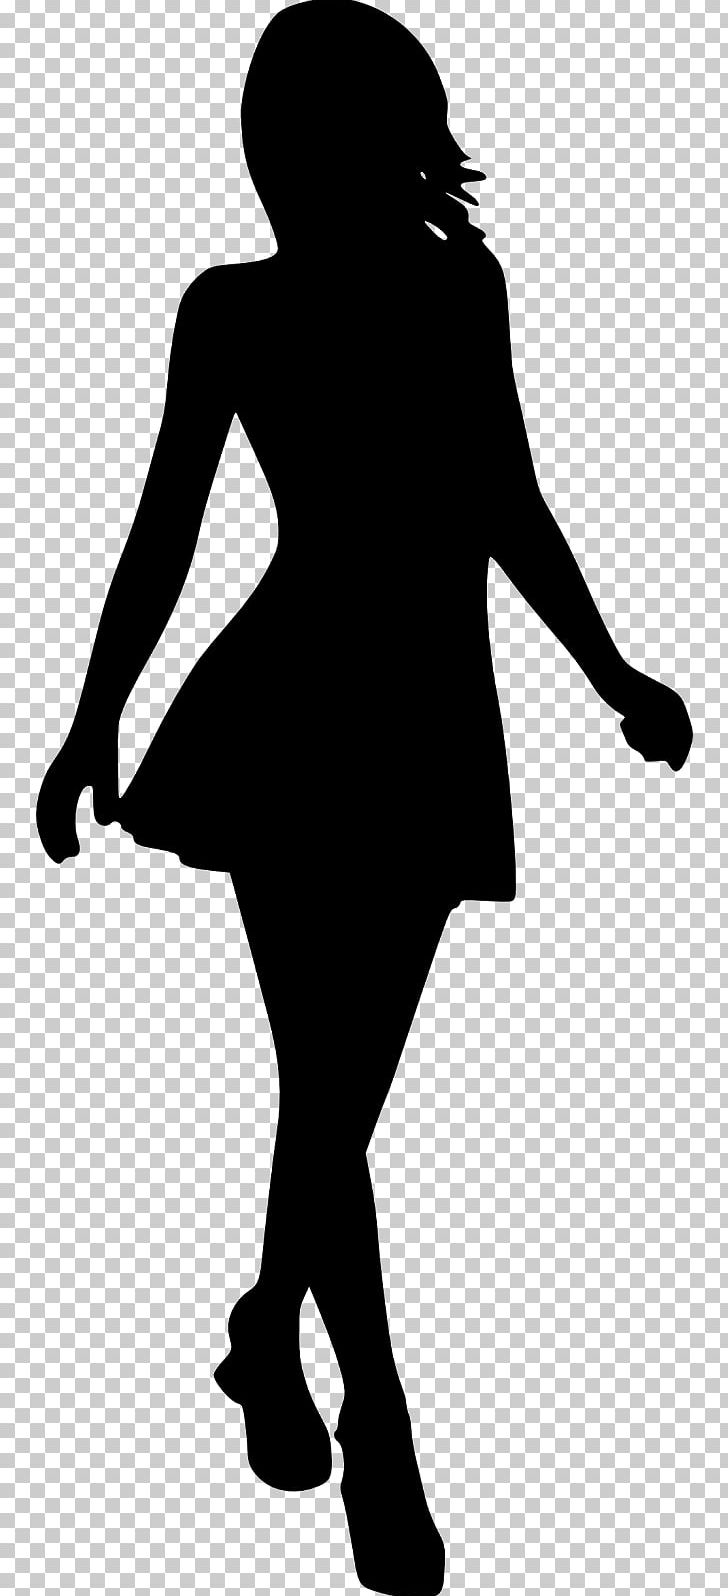 Woman Silhouette PNG, Clipart, Black, Black And White, Clip Art